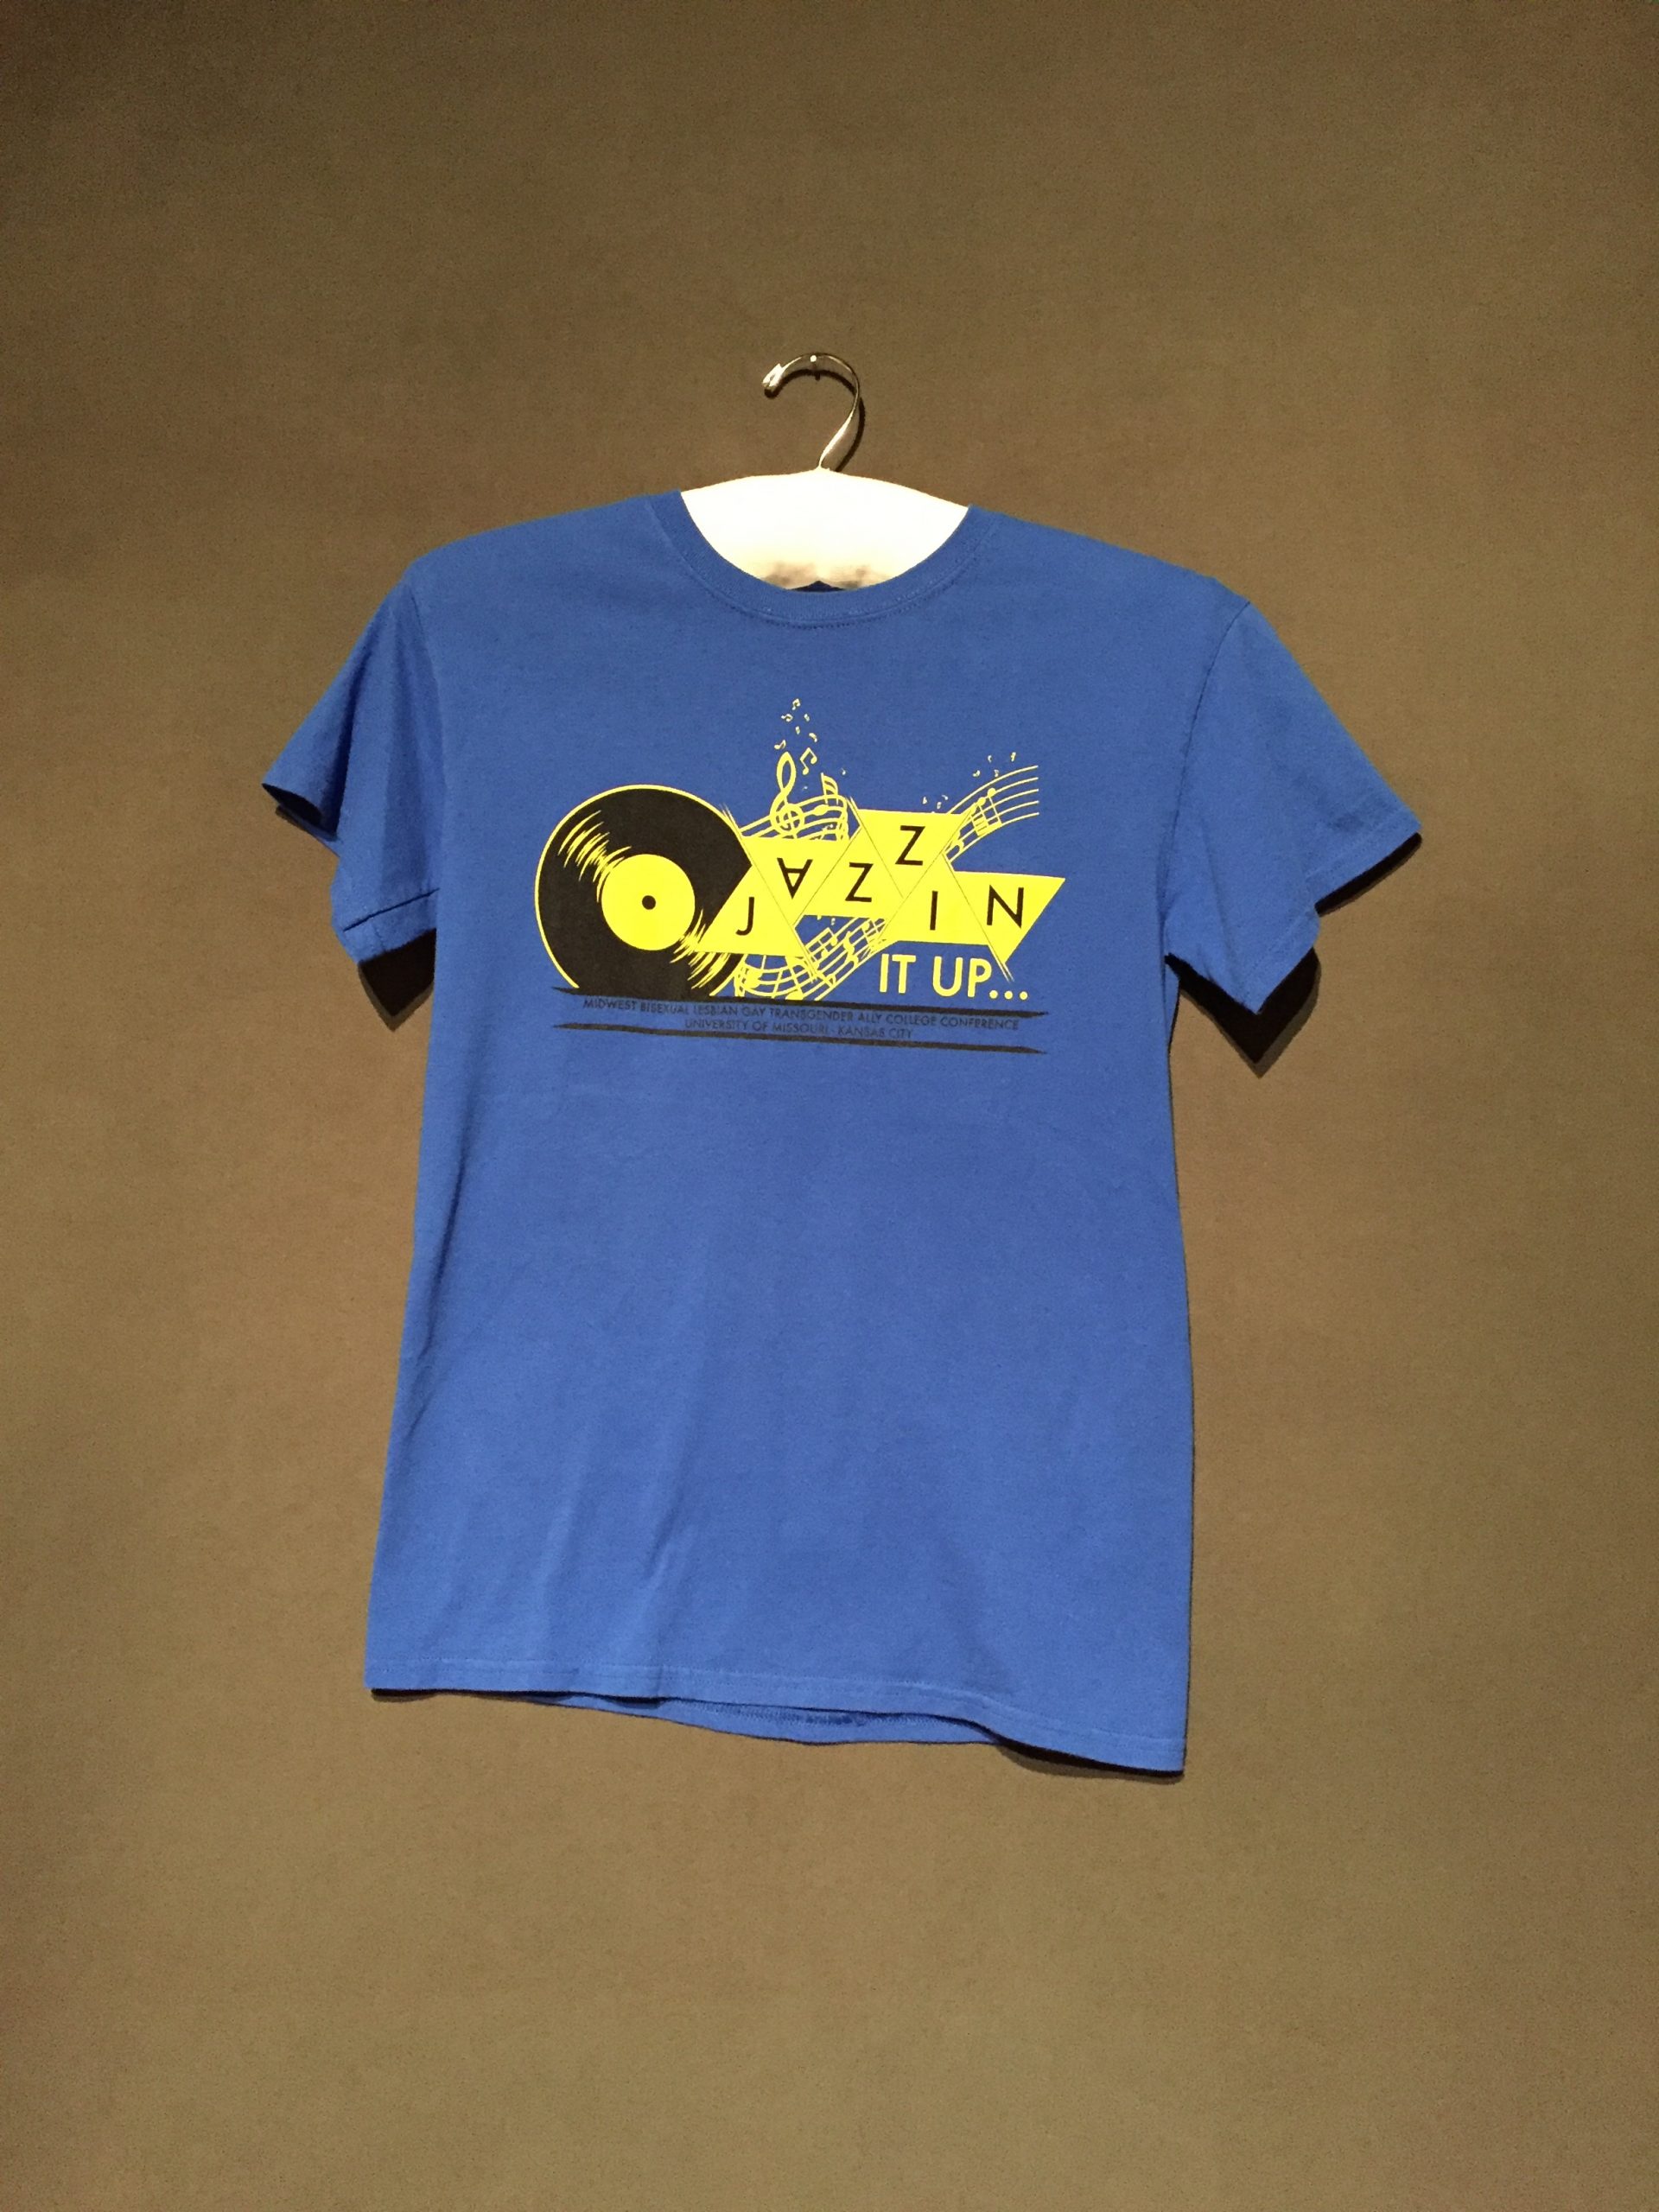 Blue short sleeve t-shirt with yellow music iconography reading "Jazzin It Up..."